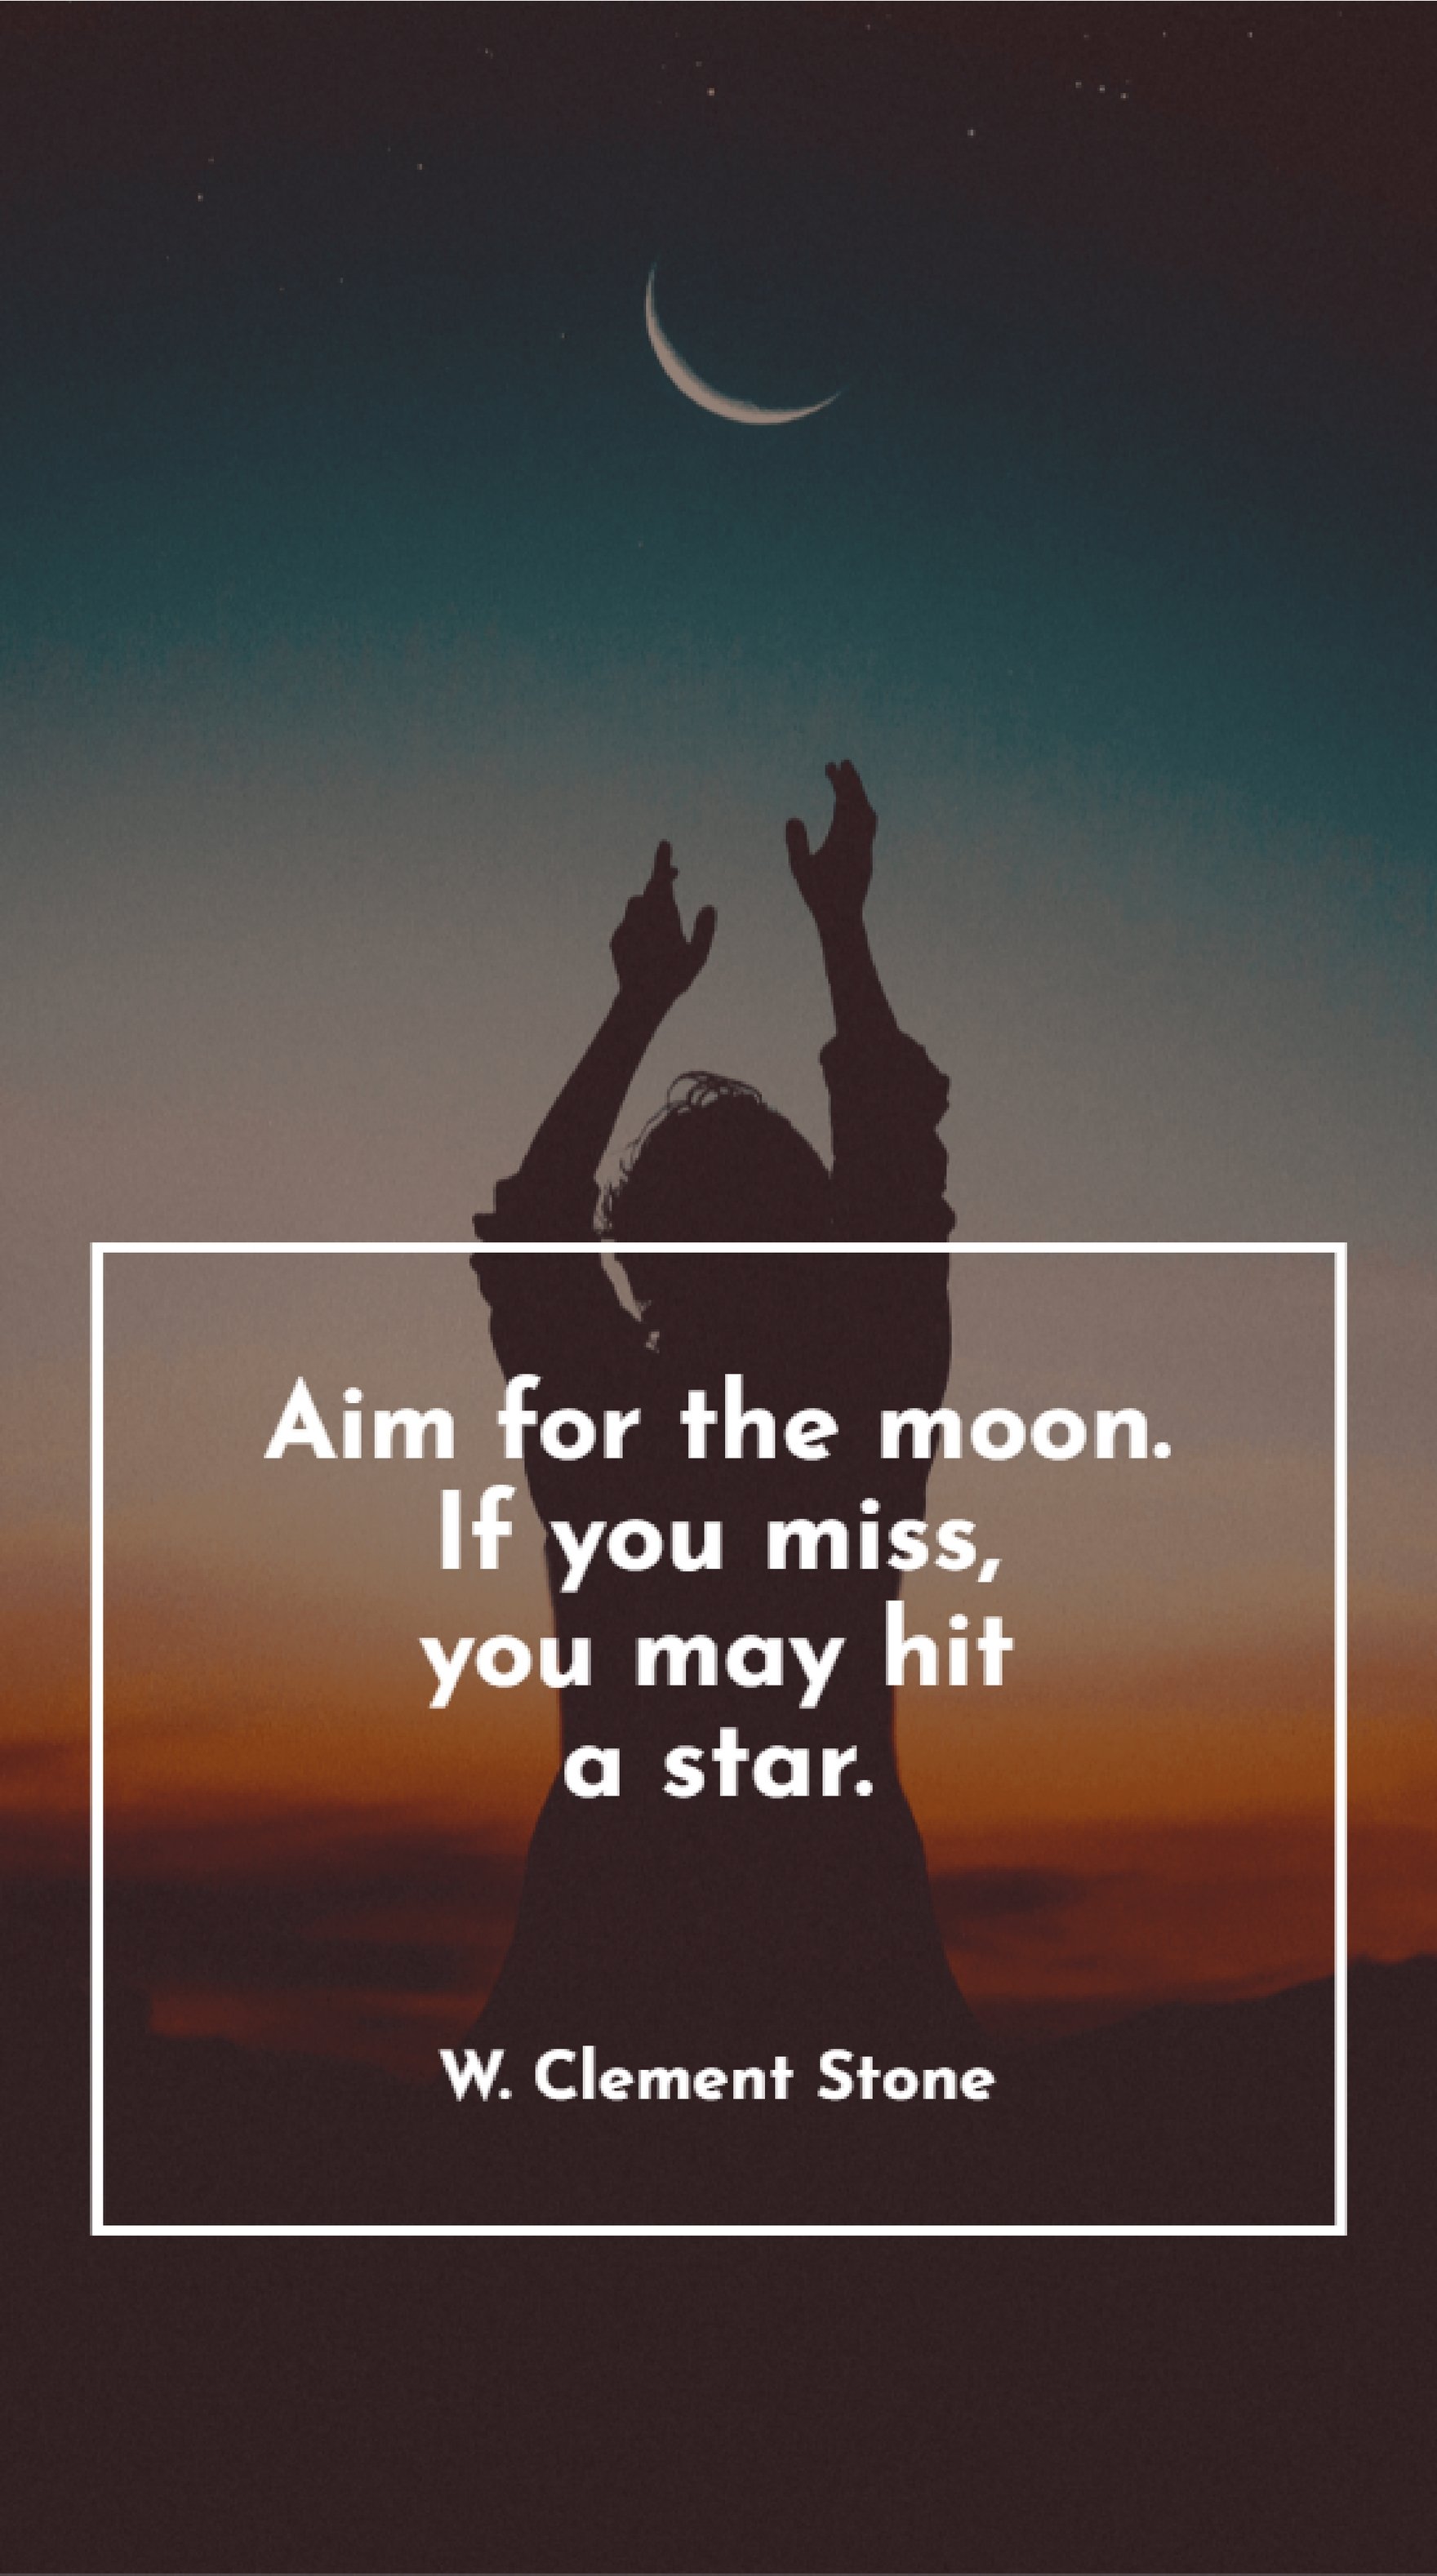 W. Clement Stone - Aim for the moon. If you miss, you may hit a star.